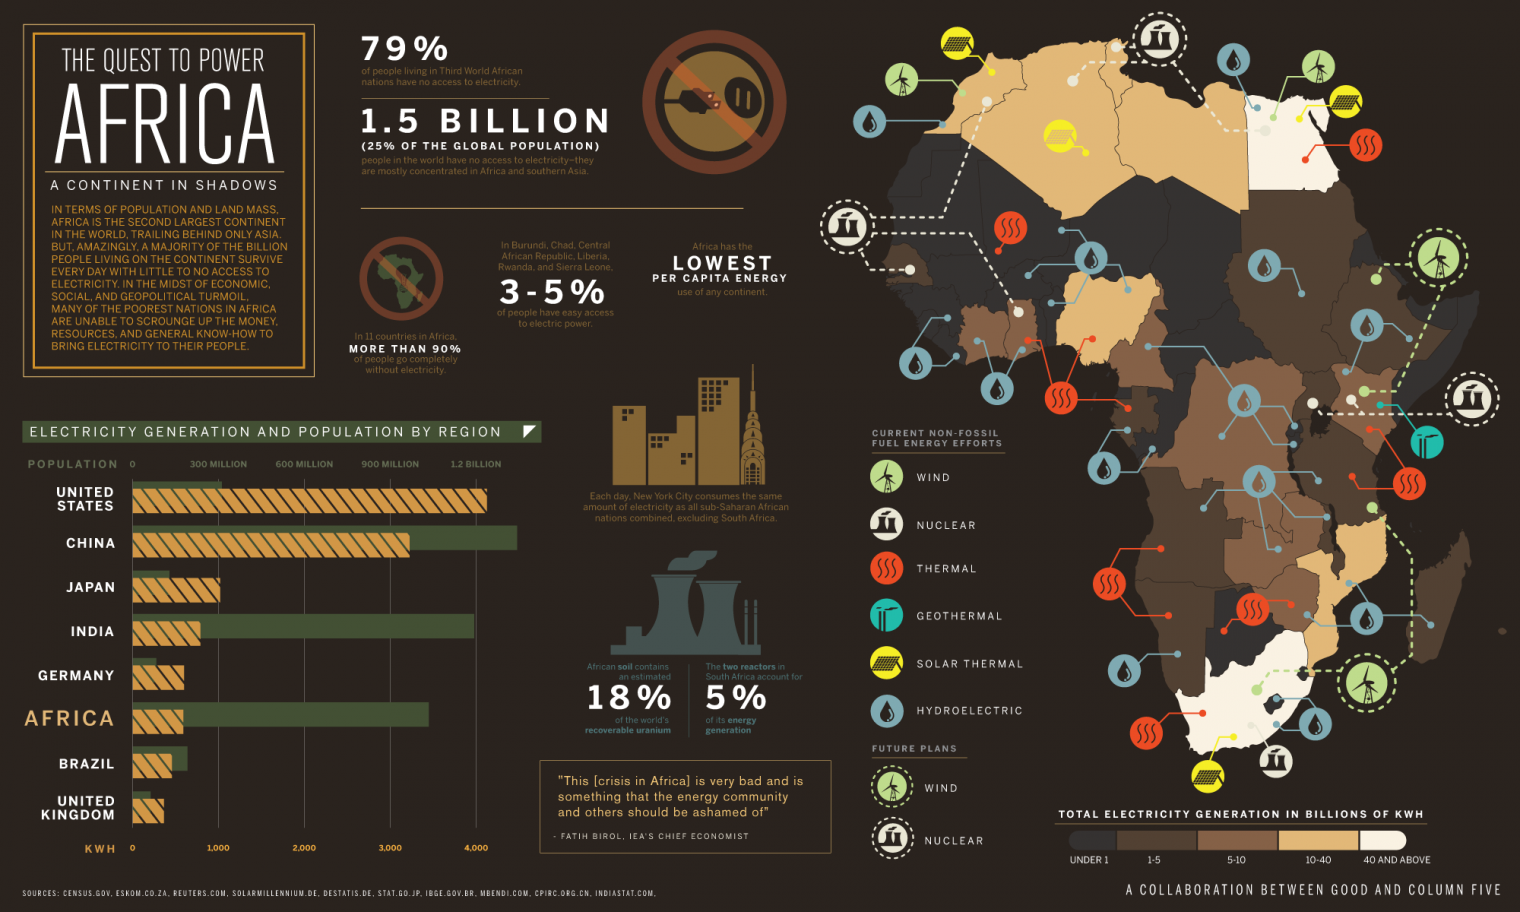 The Quest to Power Africa